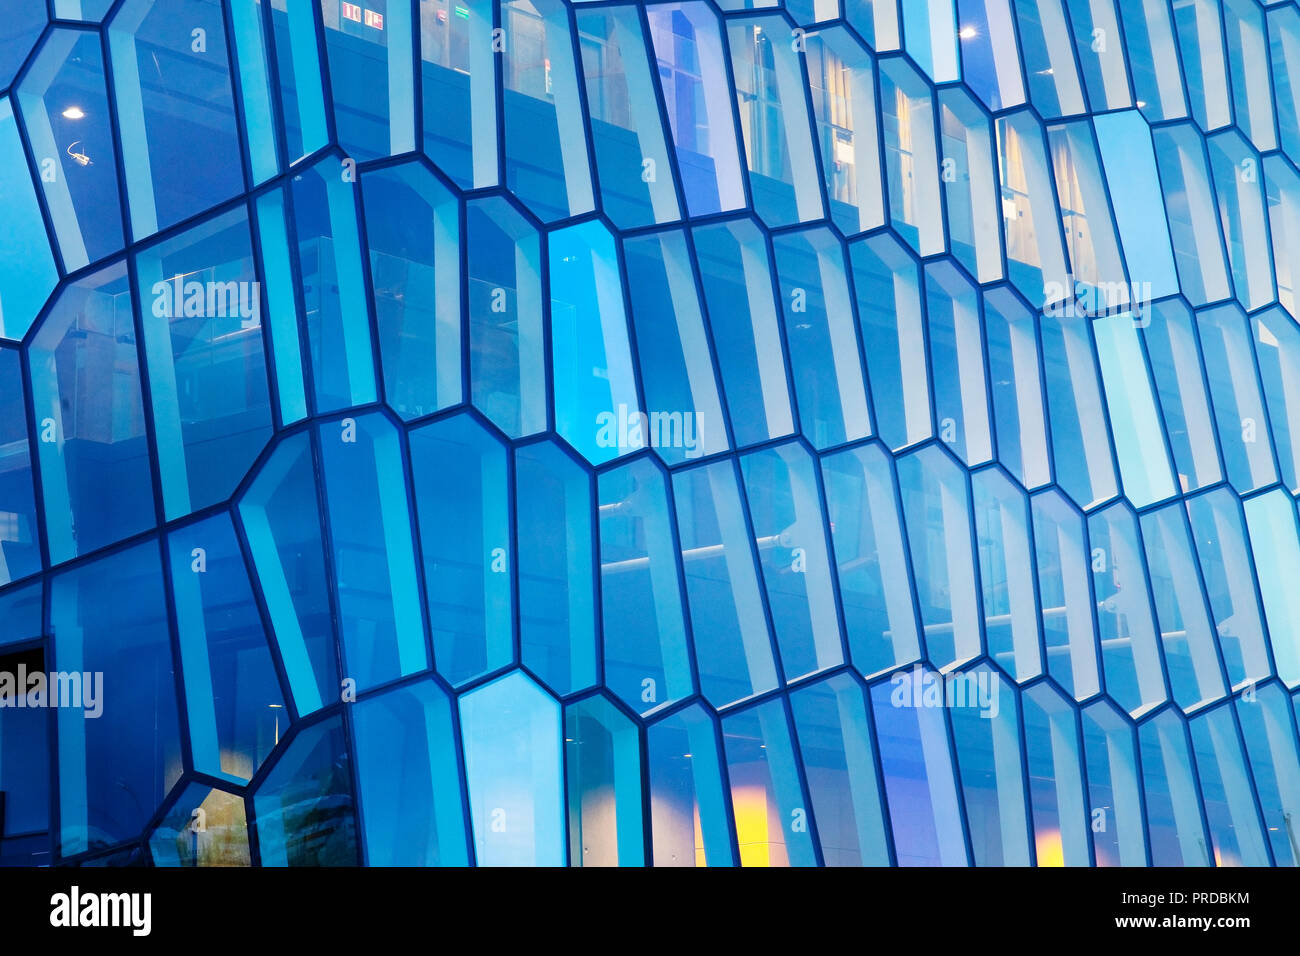 Facade detail of the honeycomb structure made of dichromatic glass by Olafur Eliasson, concert hall Harpa, Reykjavik, Iceland Stock Photo